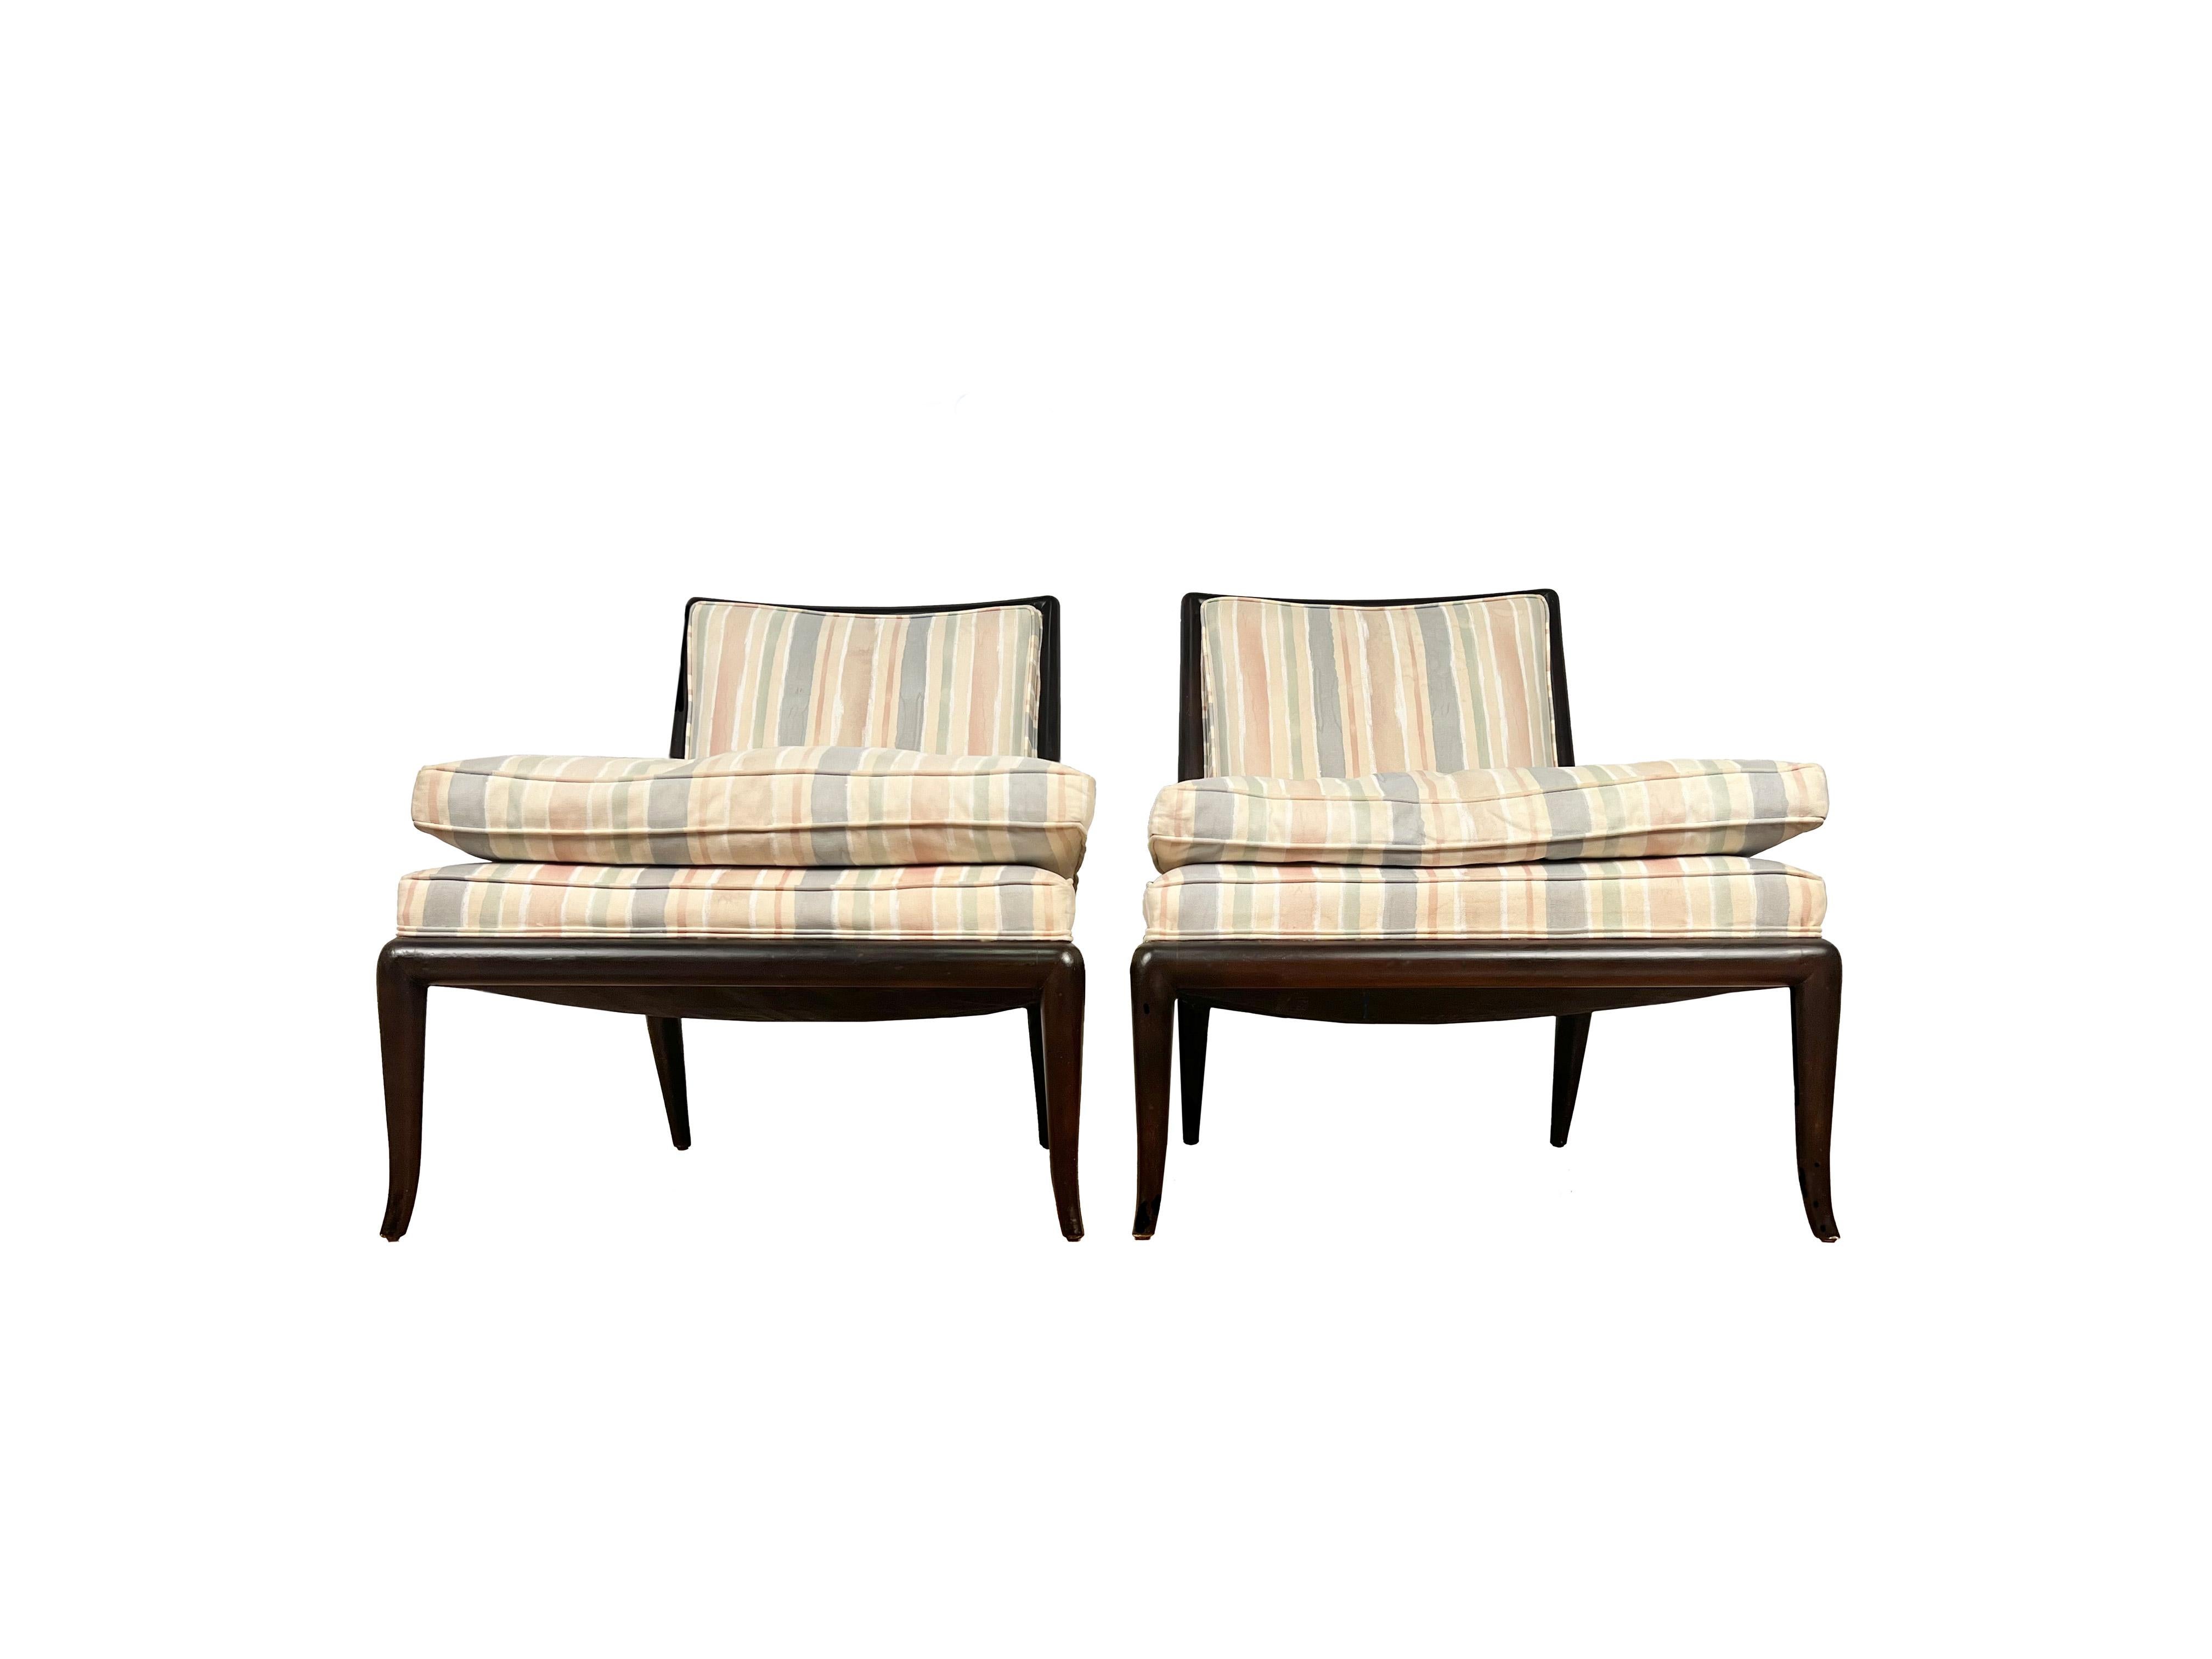 These stunning classic WMB slipper chairs are a timeless and elegant design by T.H.Robsjohn Gibbings and were manufactured by Widdicomb in the 1950s. This versatile pair could be at home in any home or office and work with many different styles. The